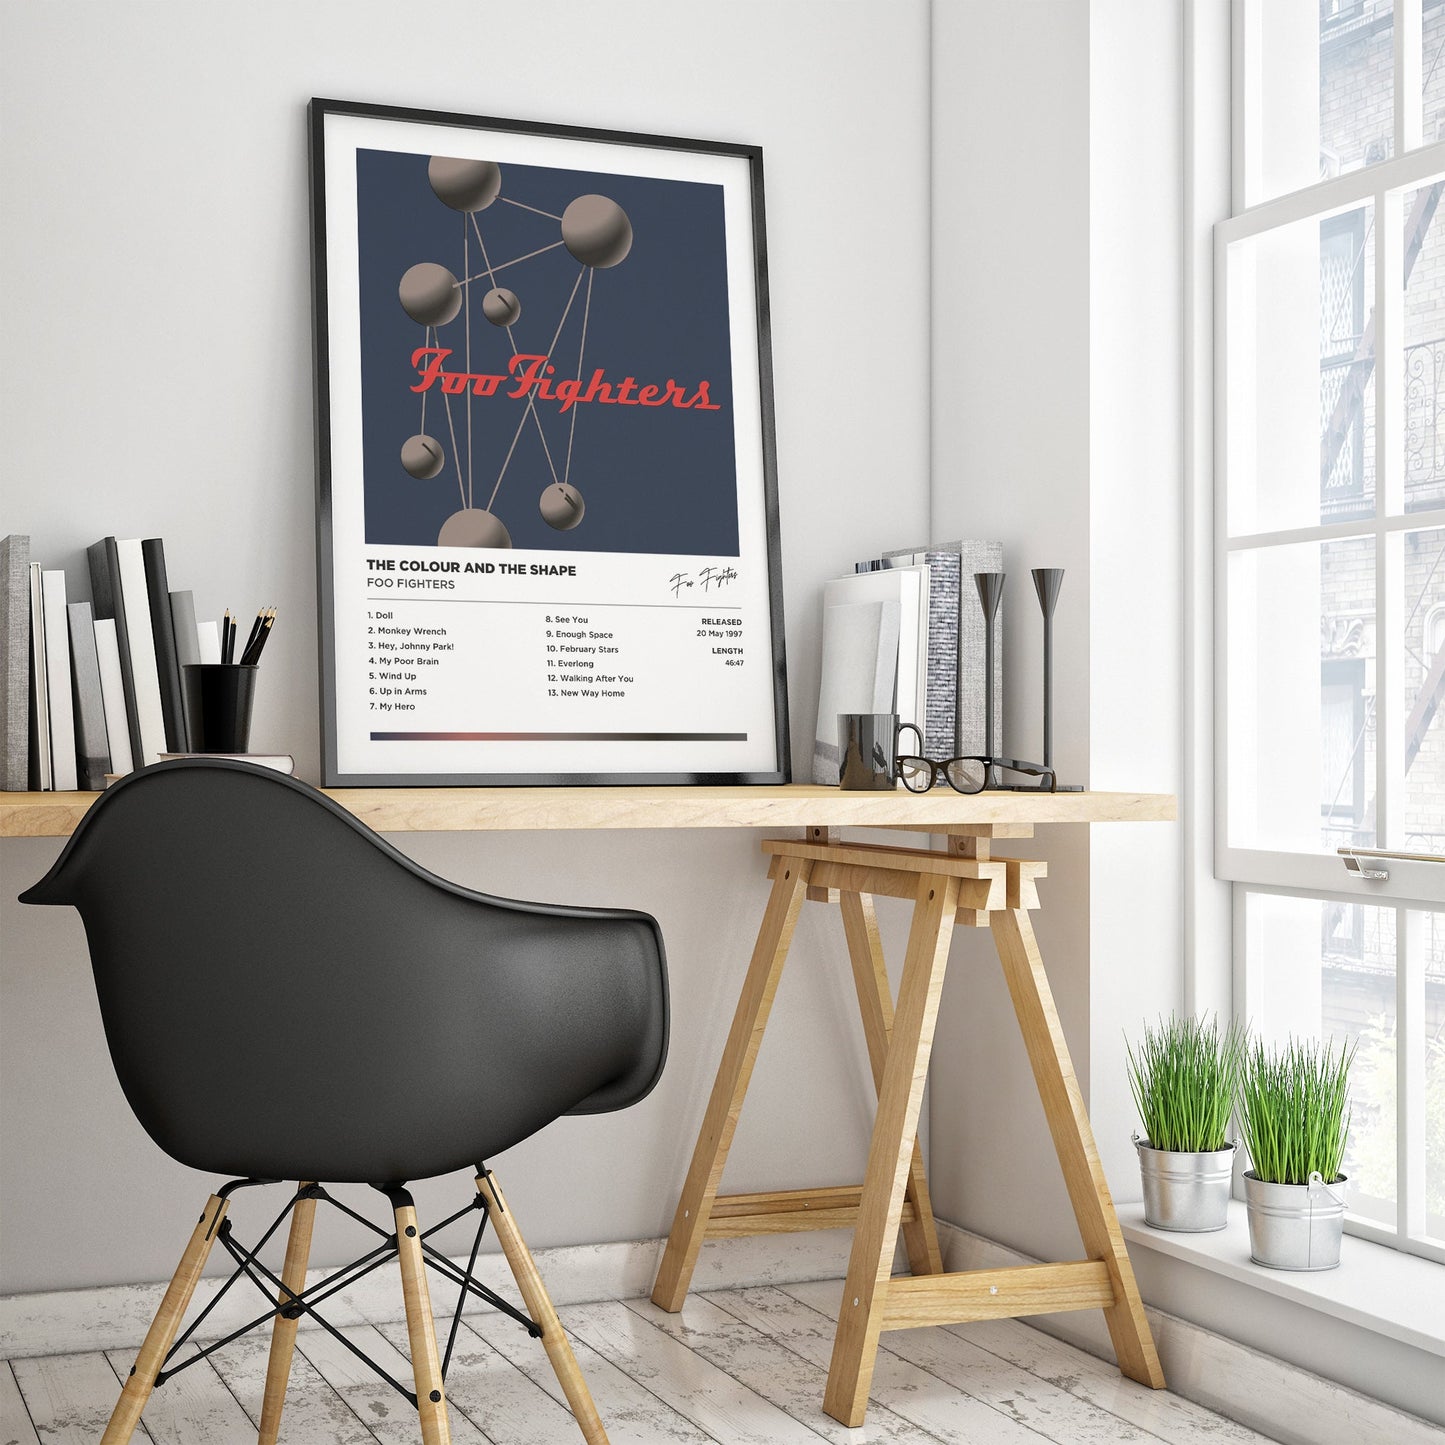 Foo Fighters - The Colour and the Shape Framed Poster Print | Polaroid Style | Album Cover Artwork